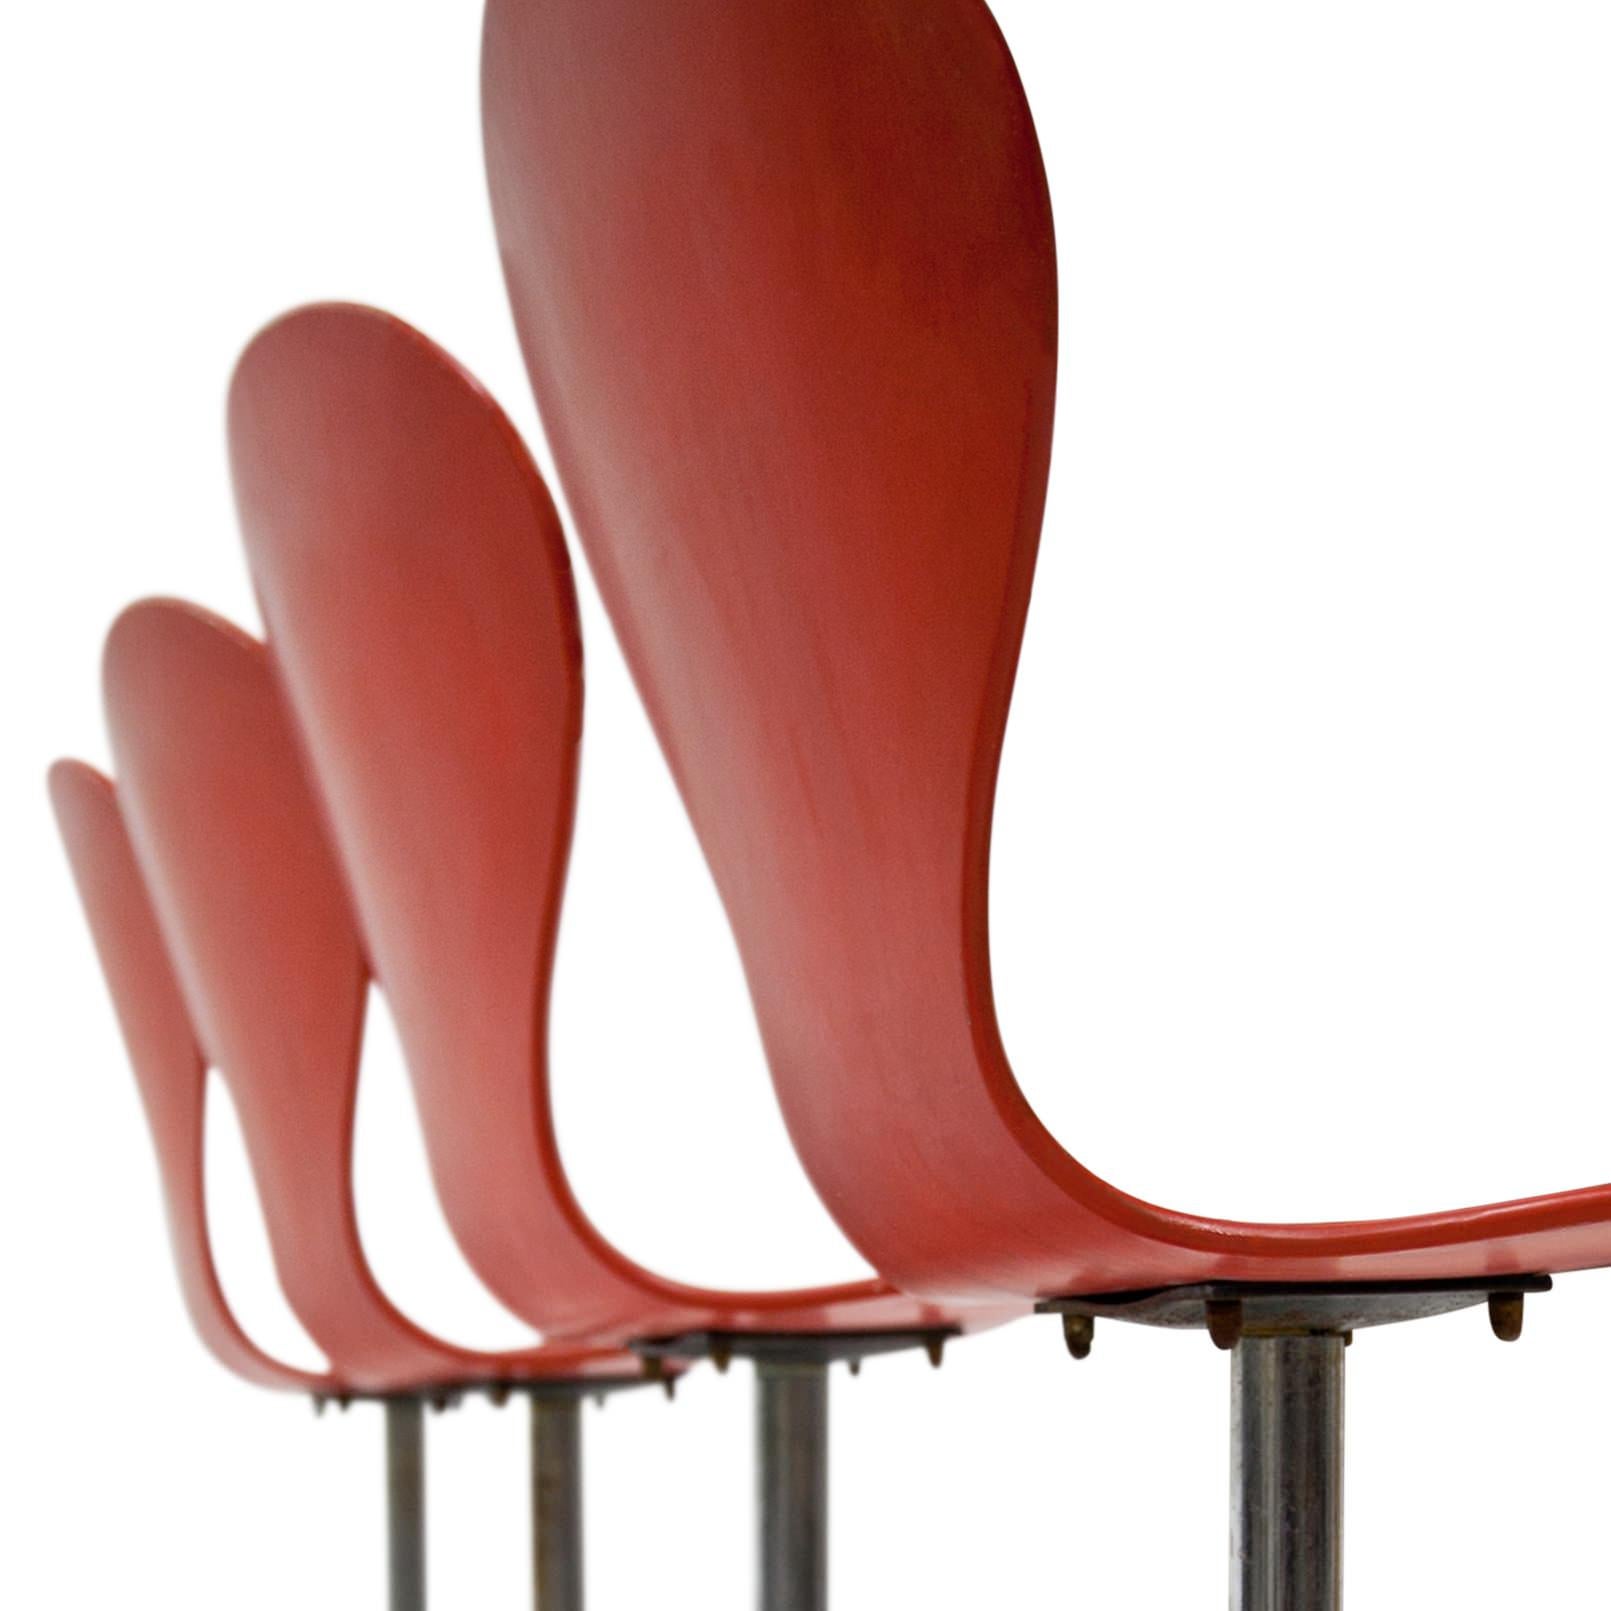 Set of four swivel chairs with red seats and a chromed metal base. The seats are labeled “benze Sitzmöbel und Tisch” and show some signs of age and use.